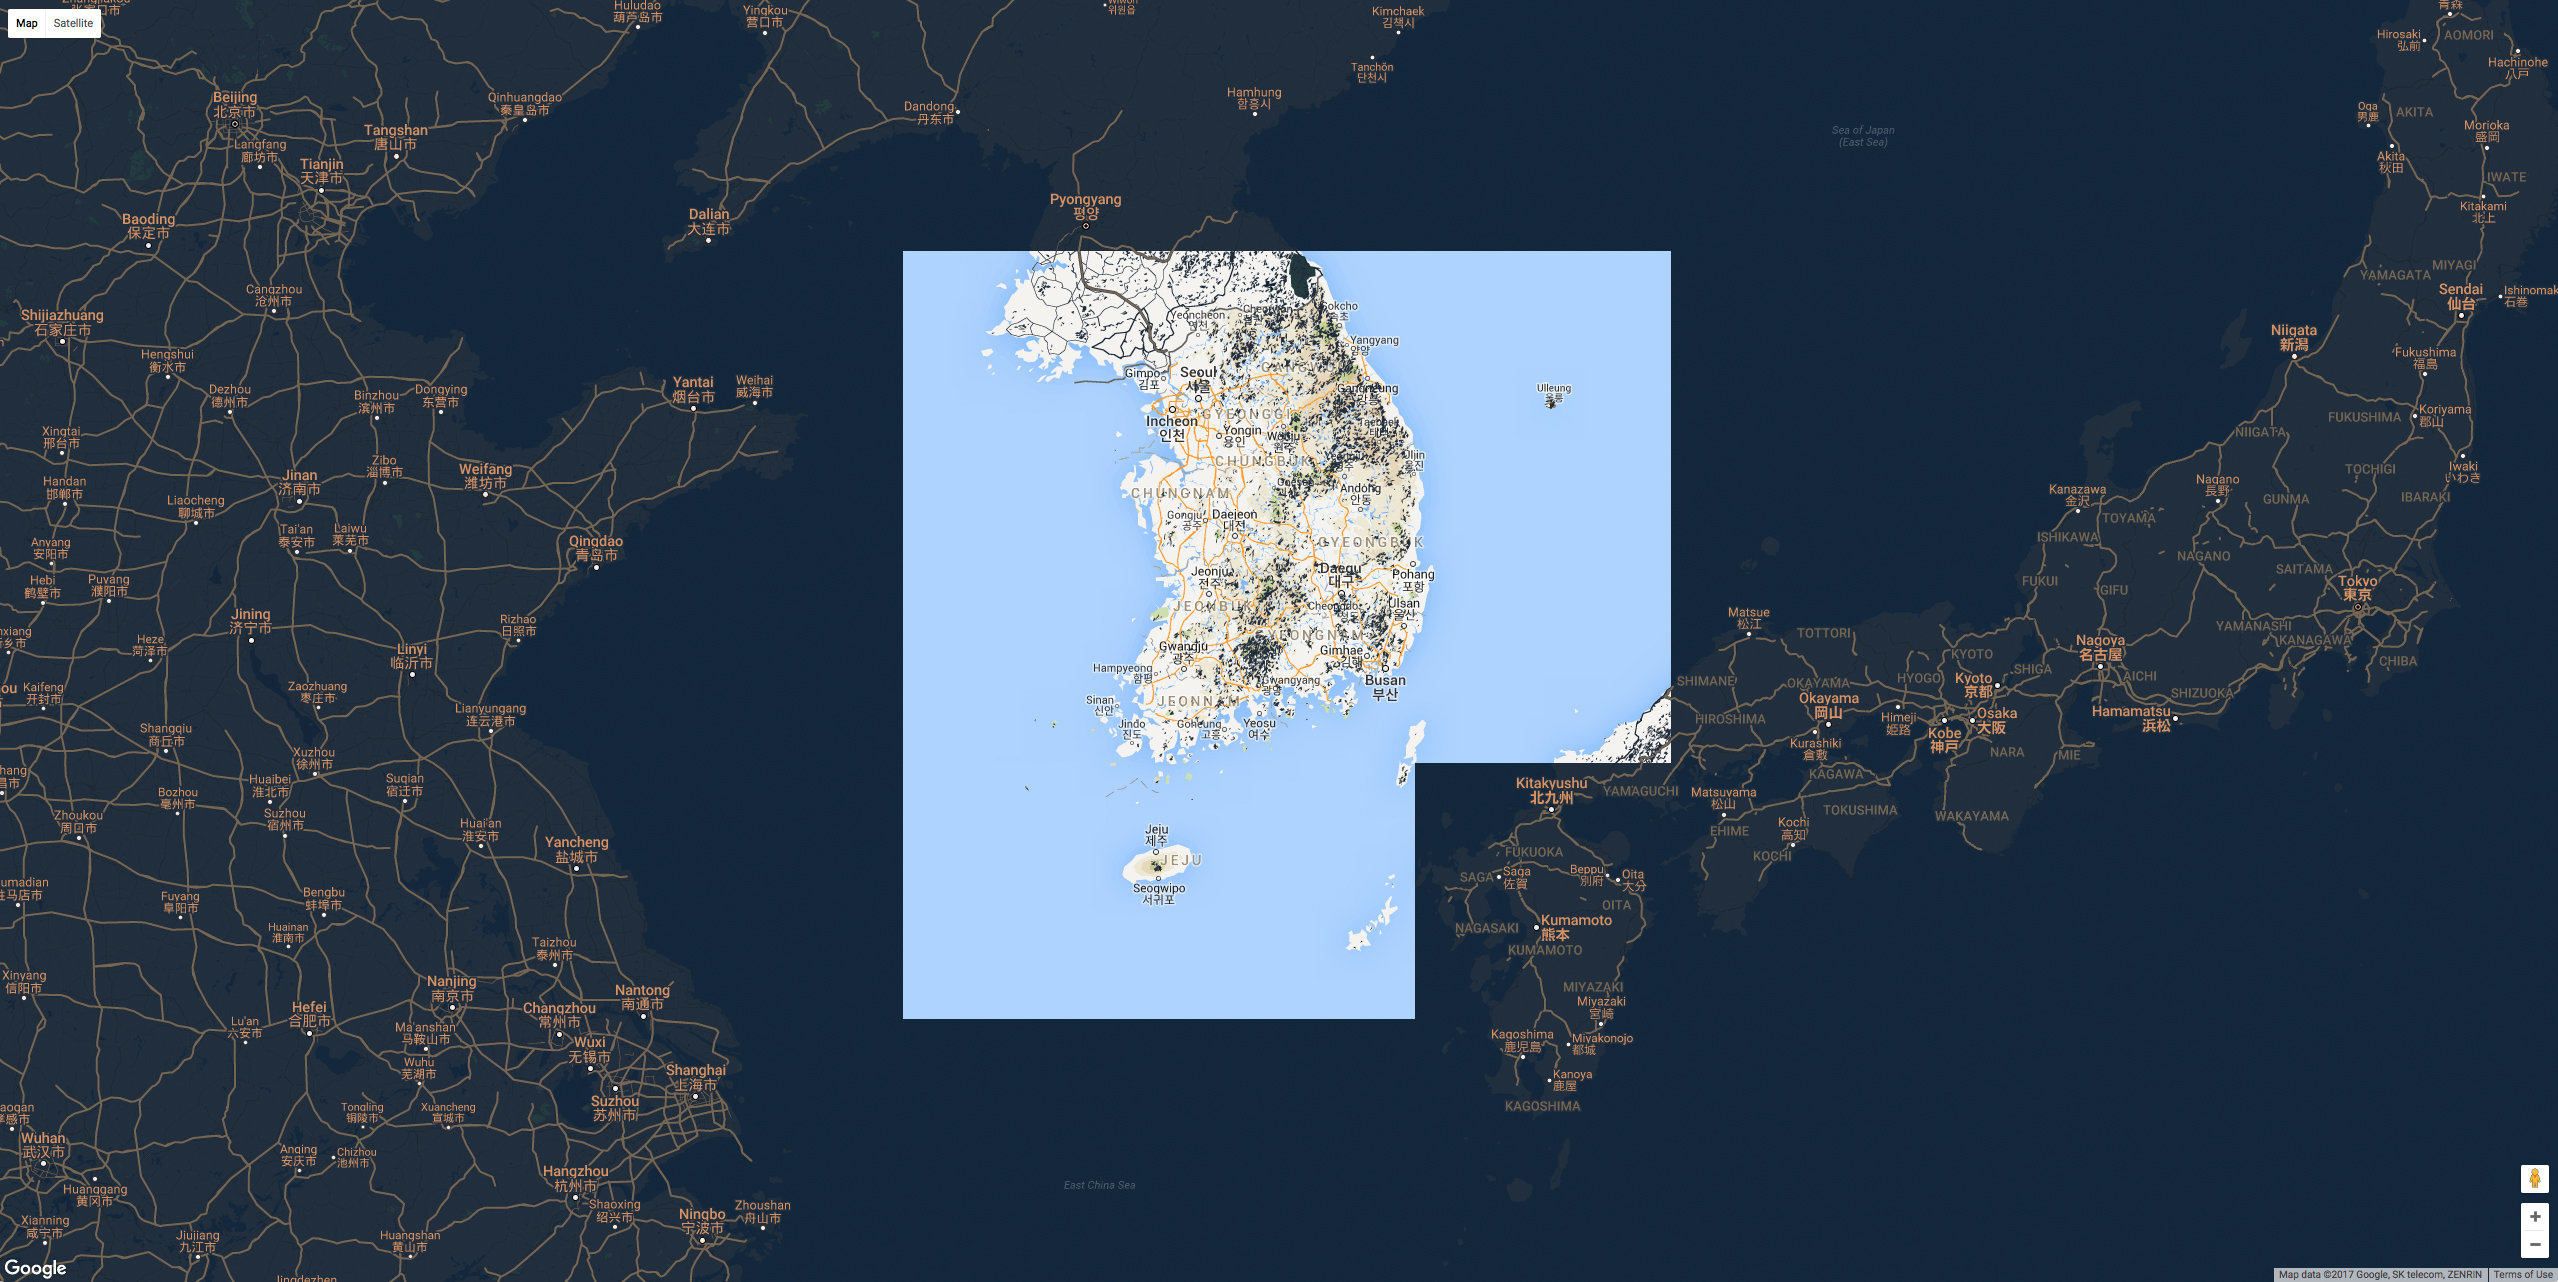 Google Maps showing limited data only for South Korea